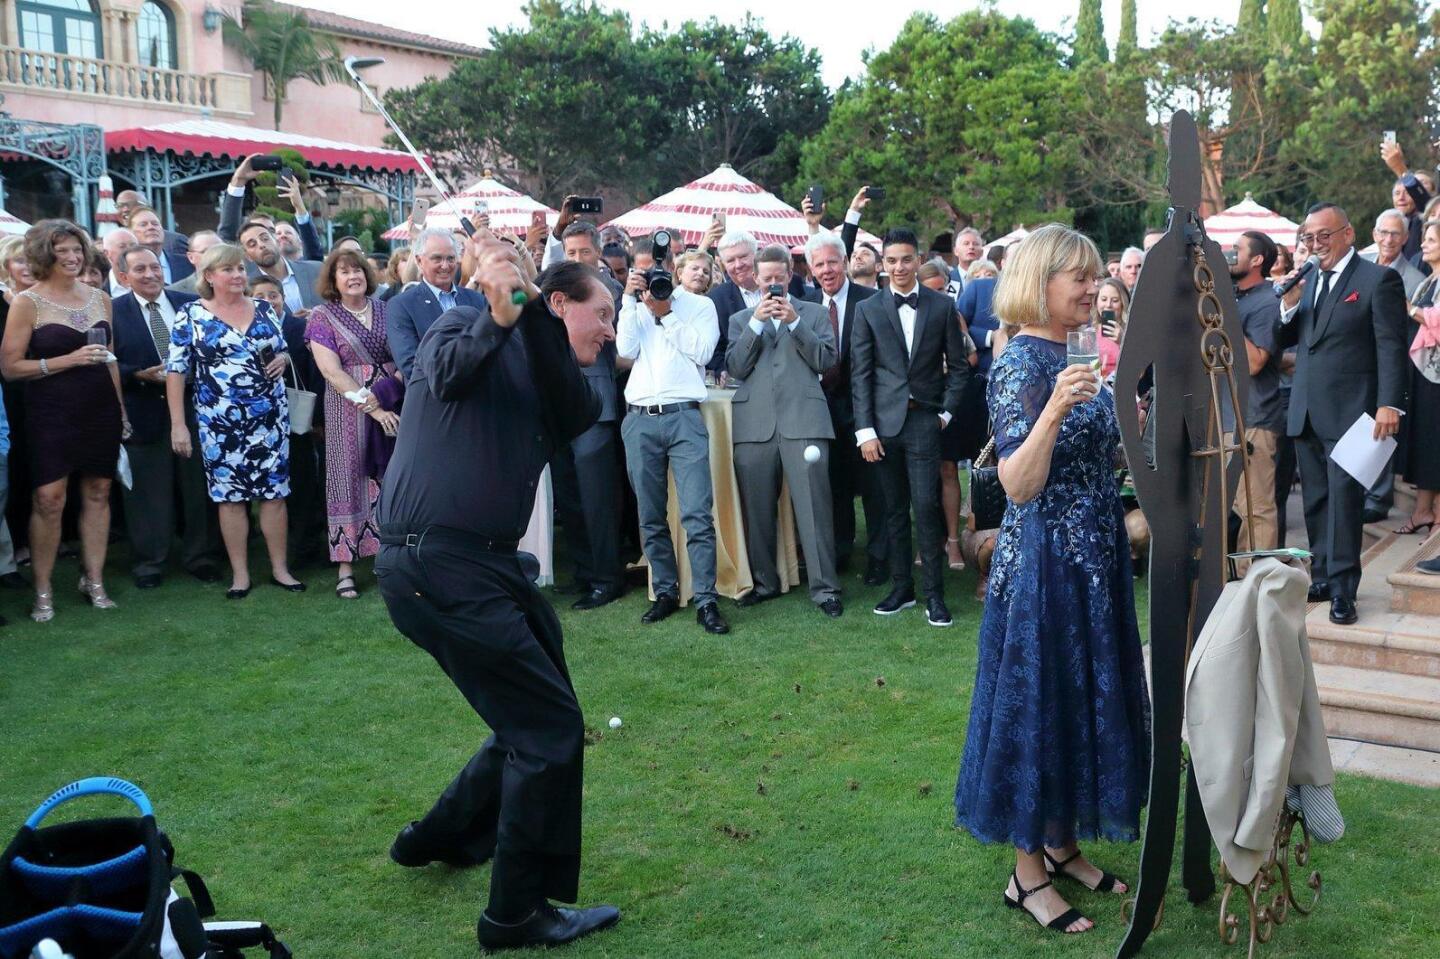 Phil Mickelson demonstrate the ?lob shot? with assistance from auction winner Sue Wagner